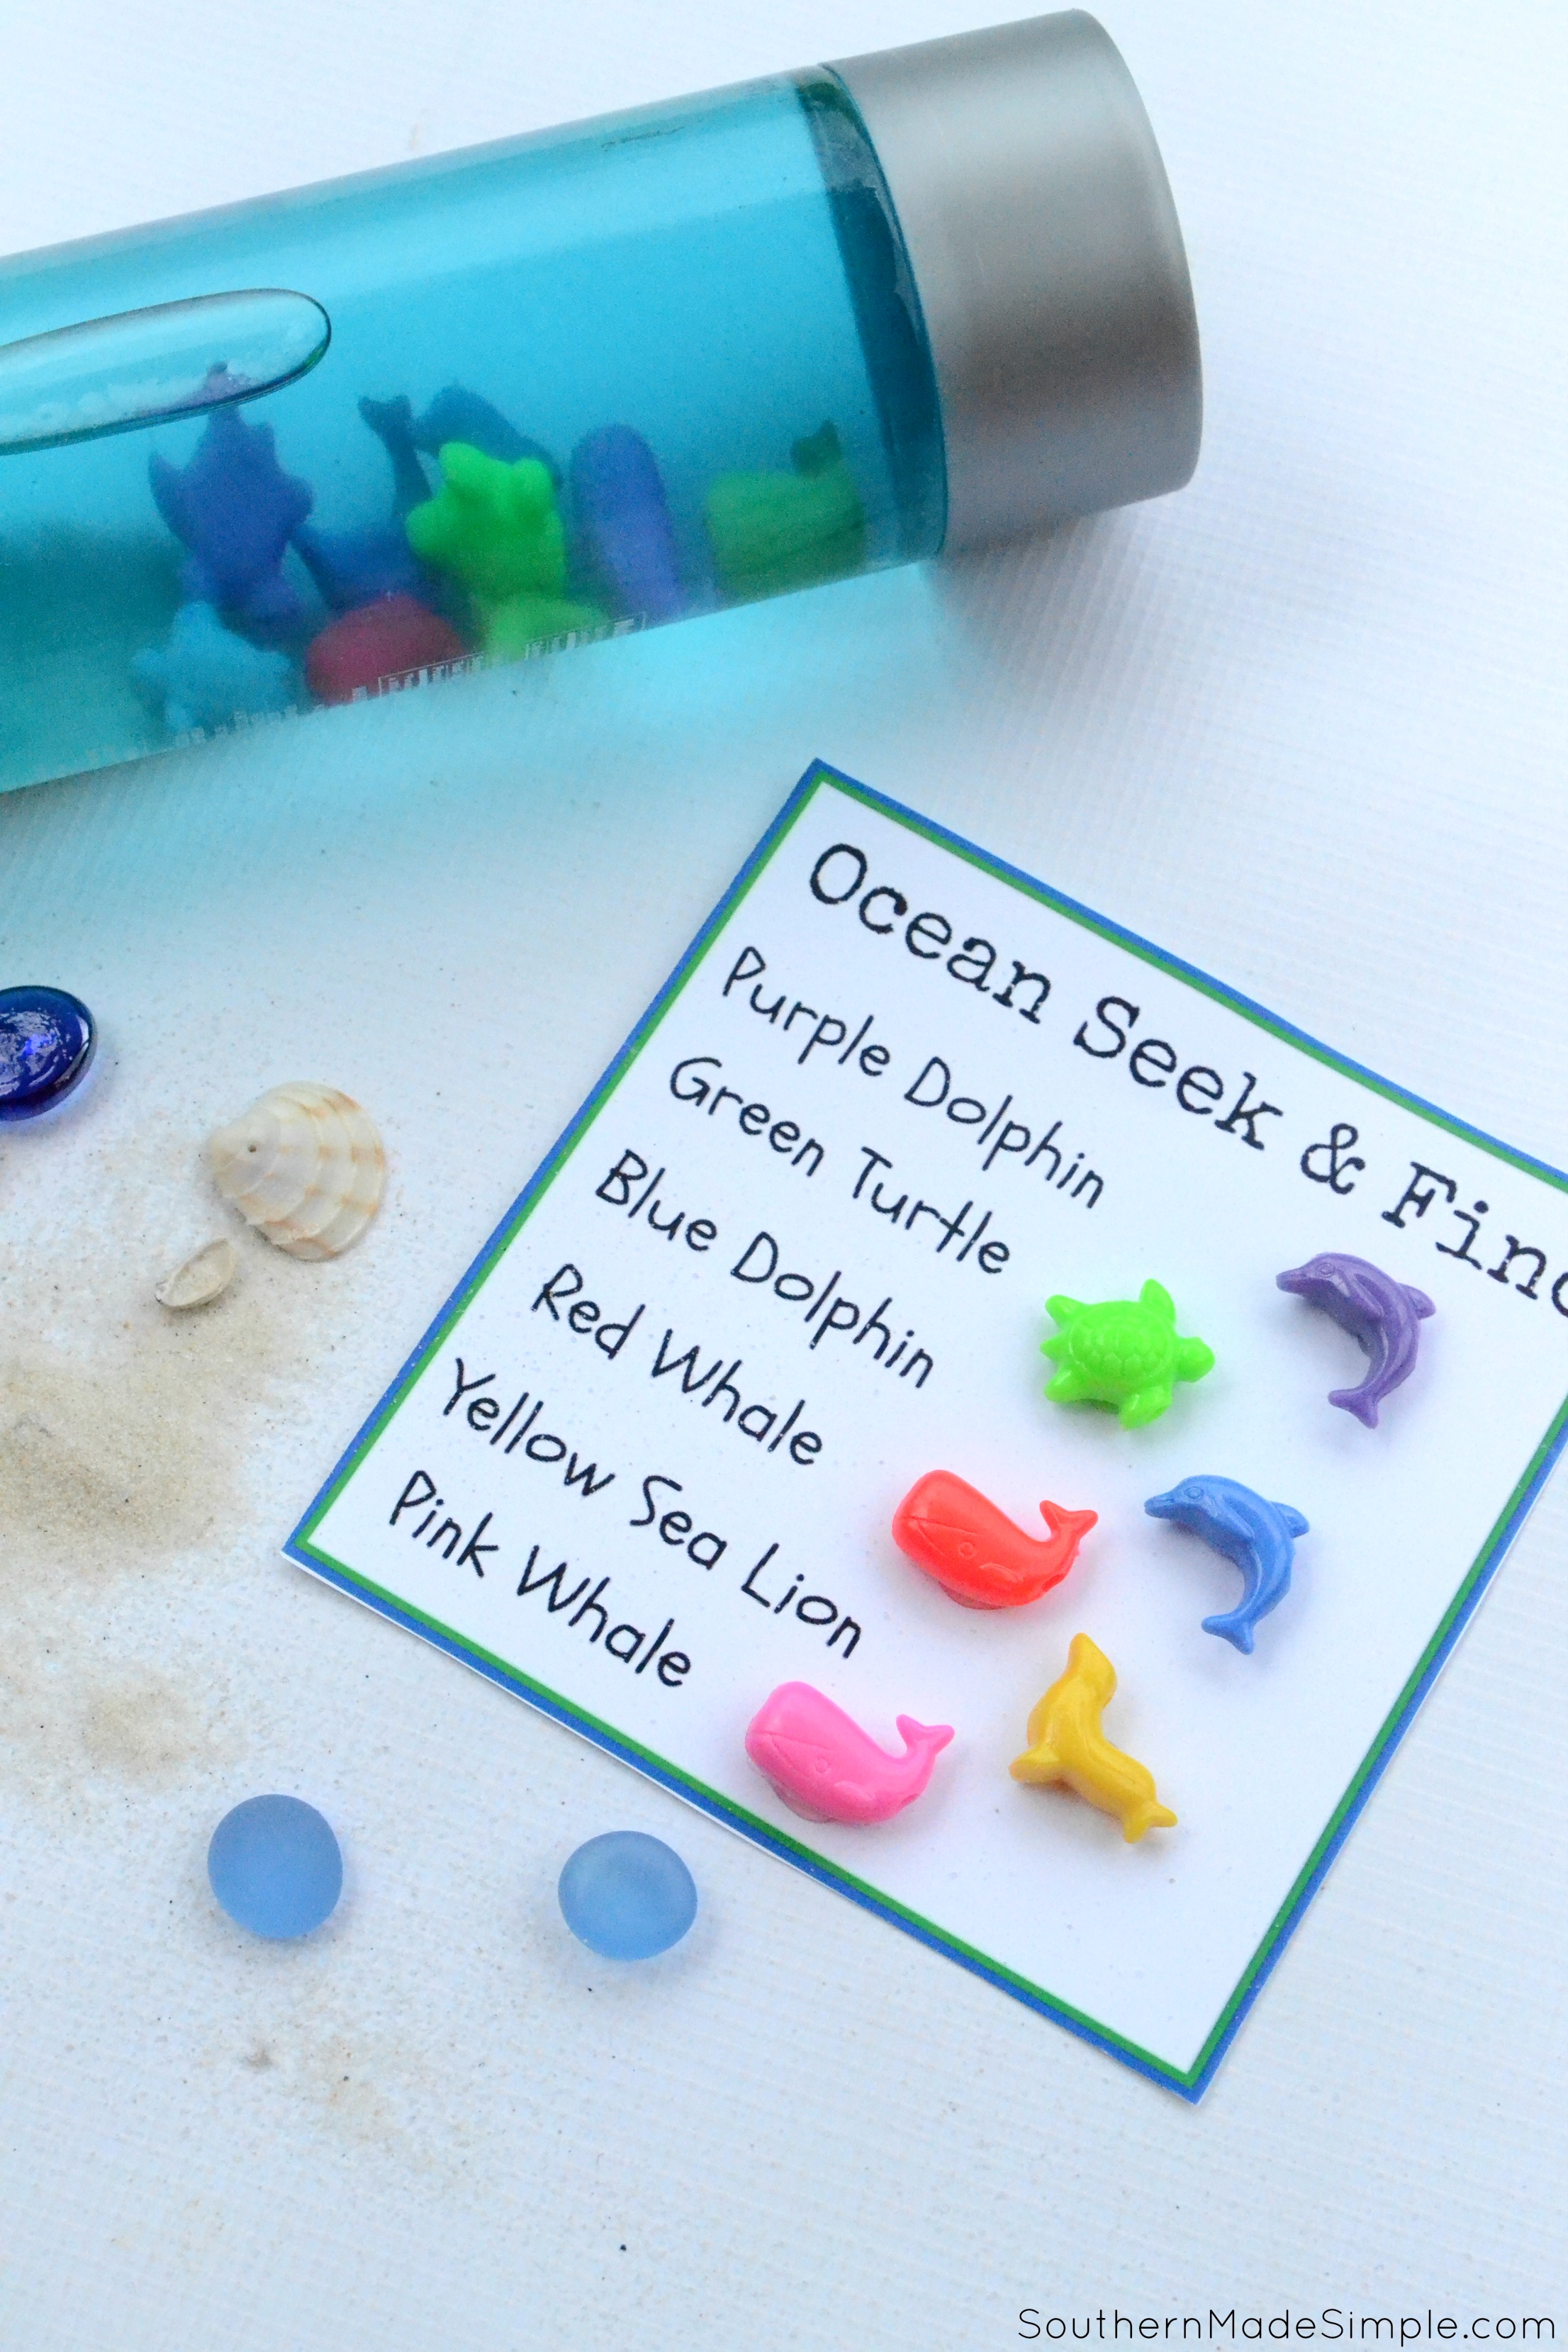 Do you have a toddler in the back seat who hates riding in the car? Take along this easy DIY Ocean Seek and Find Bottle to help keep them entertained!#RoadTripOil #ad